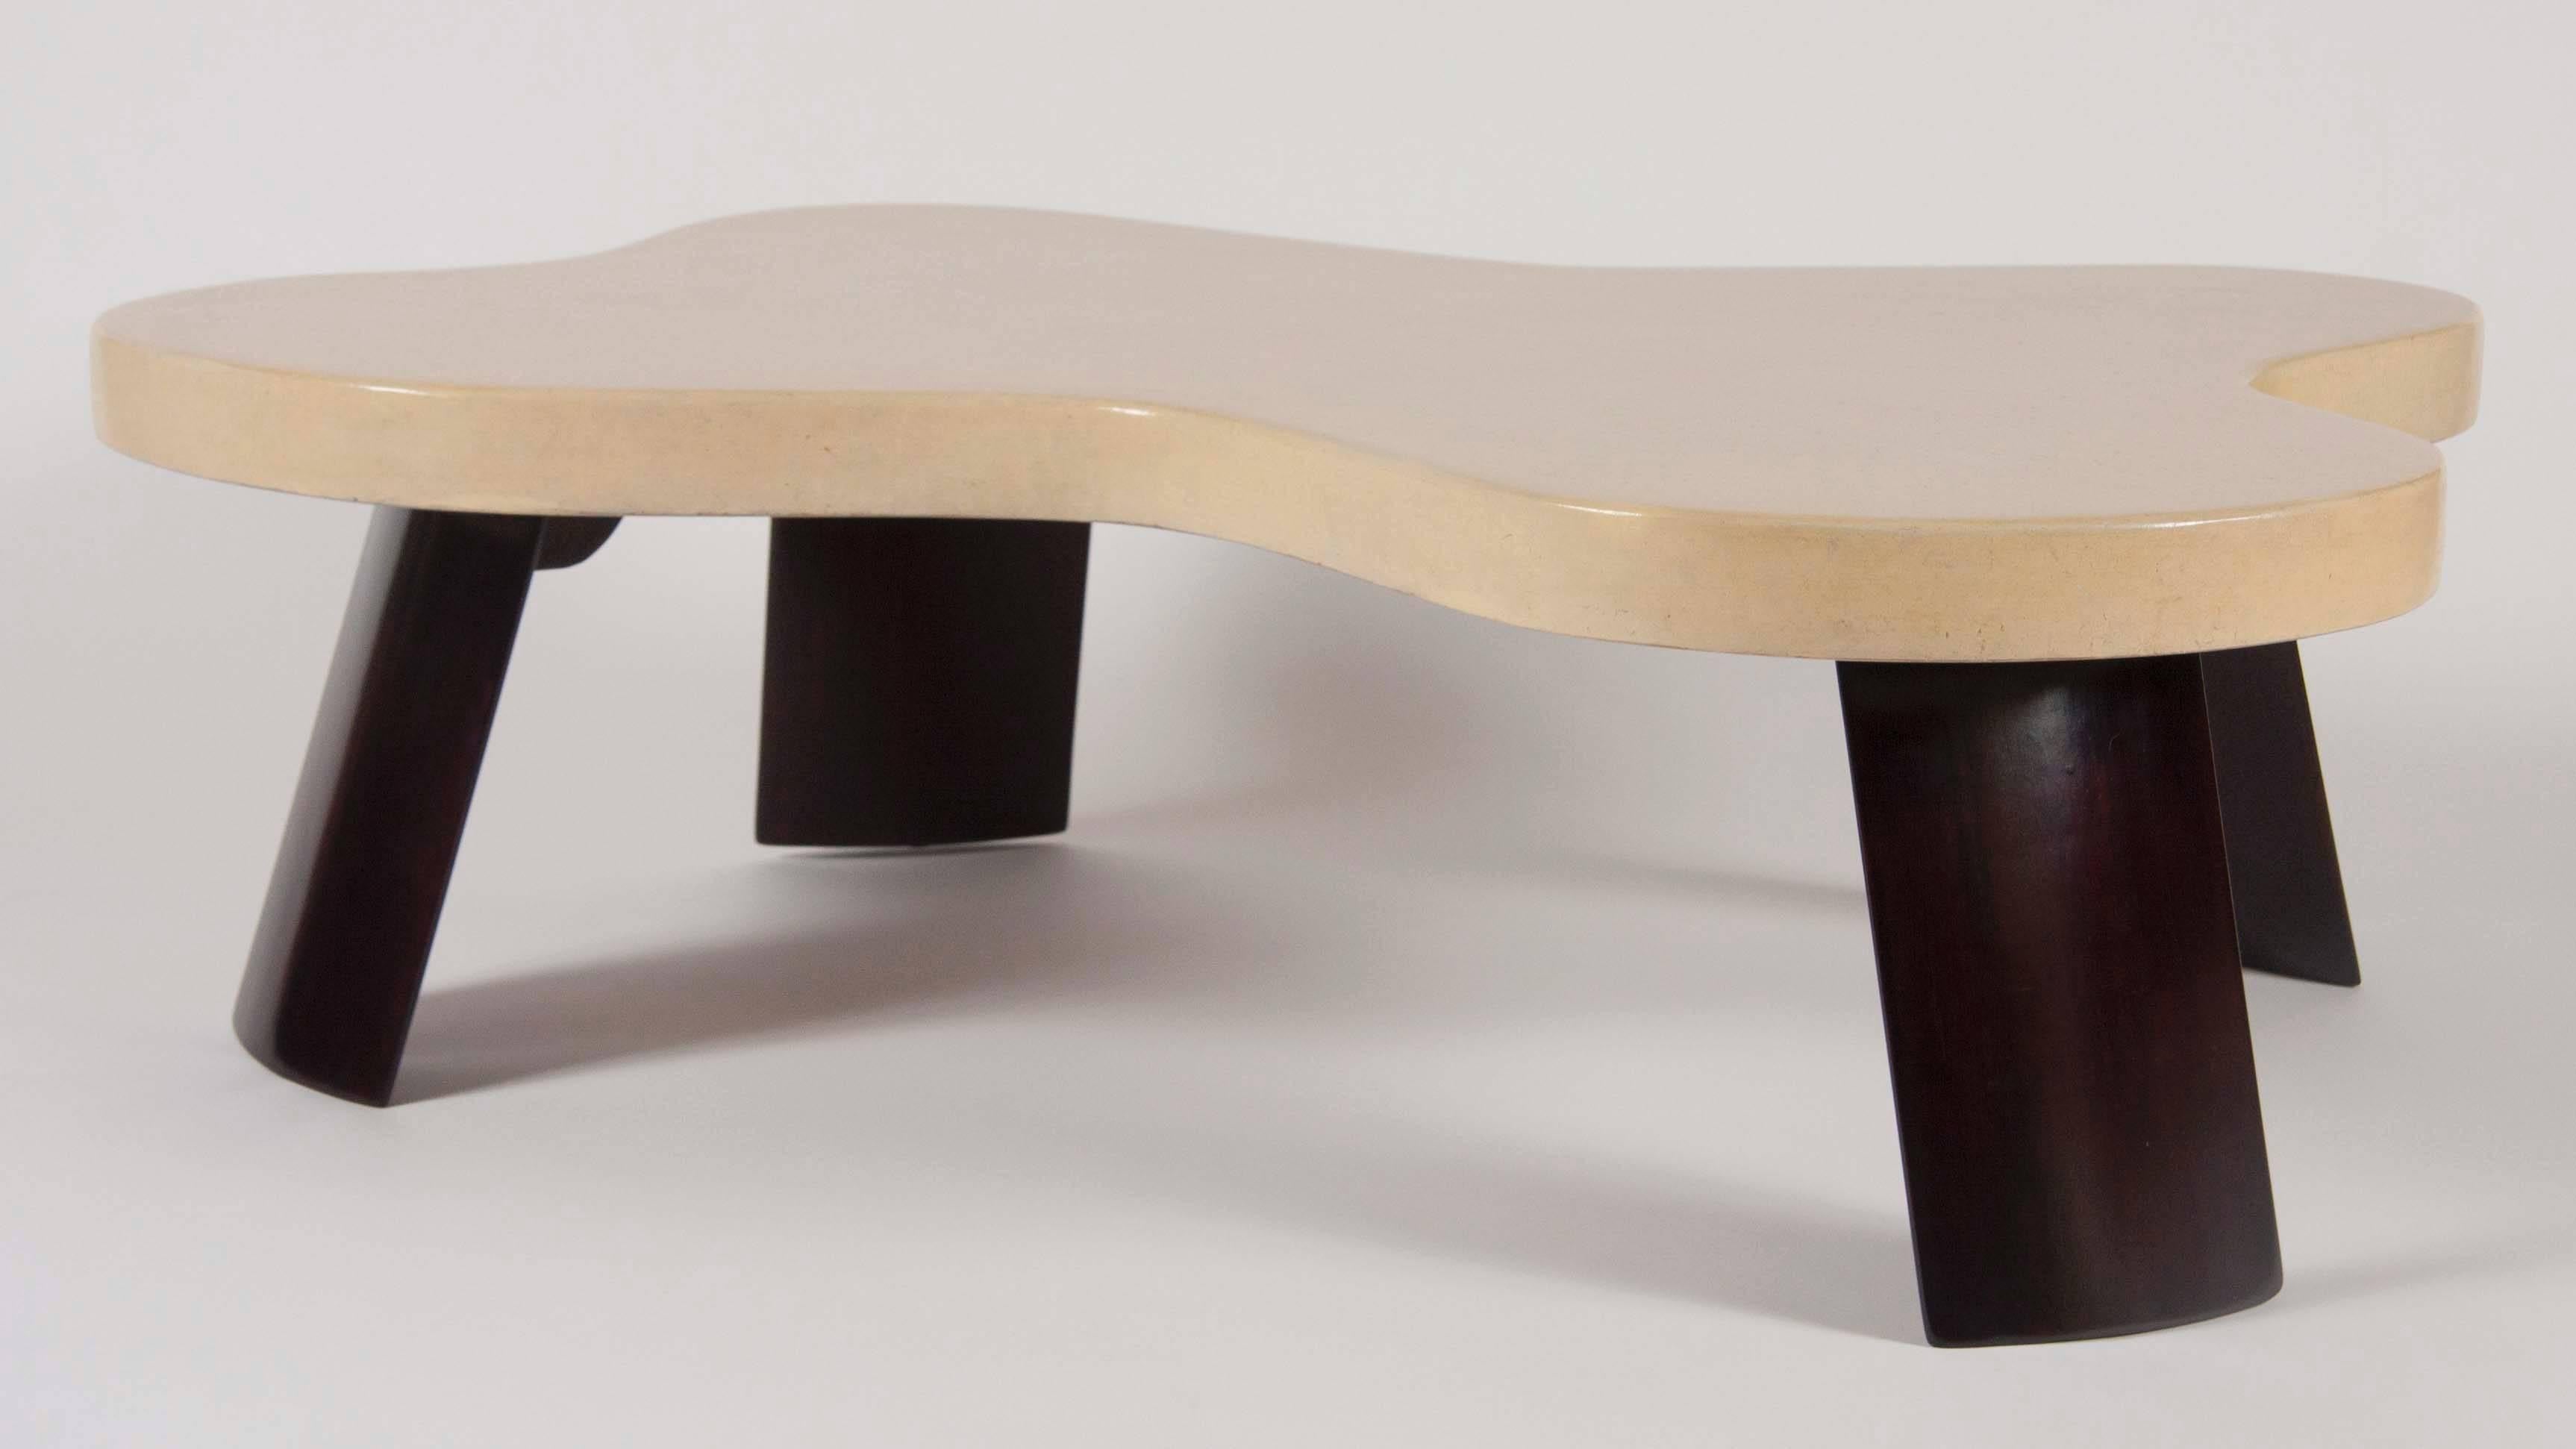 An exceptional amorphic Amoeba table by Paul Frankl for Johnson Furniture having cork veneer top on four wooden legs.